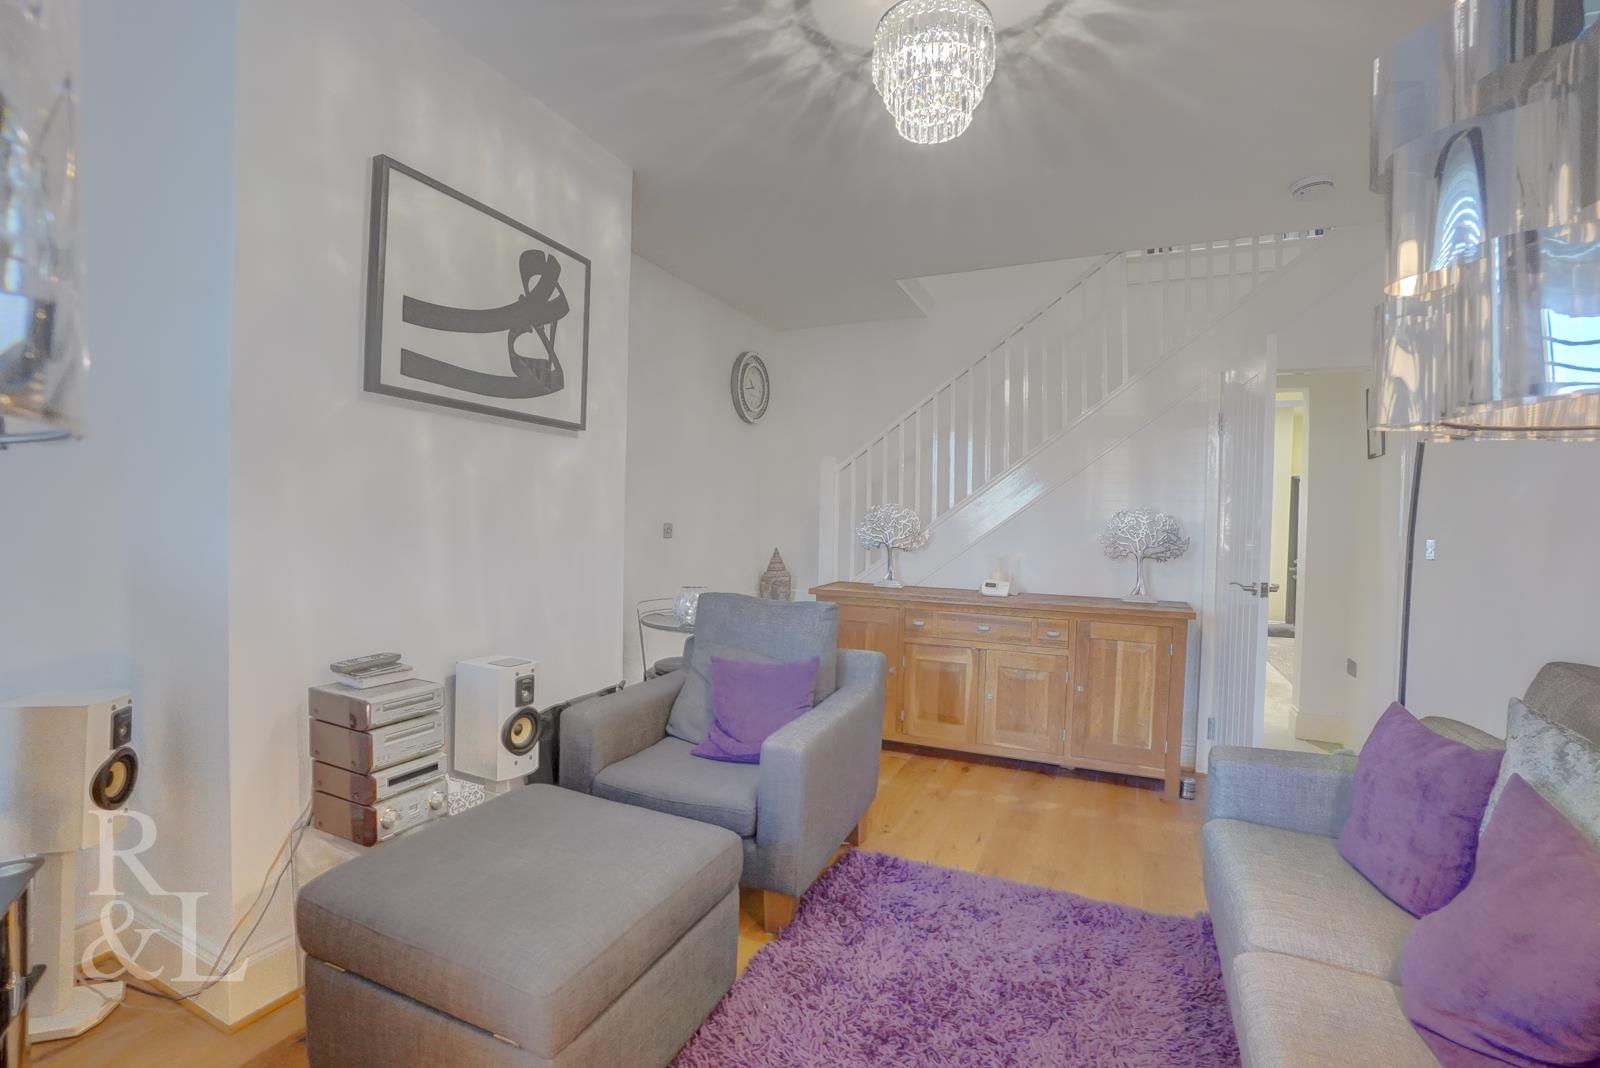 Property image for Dorothy Boot Homes, Wilford, Nottingham